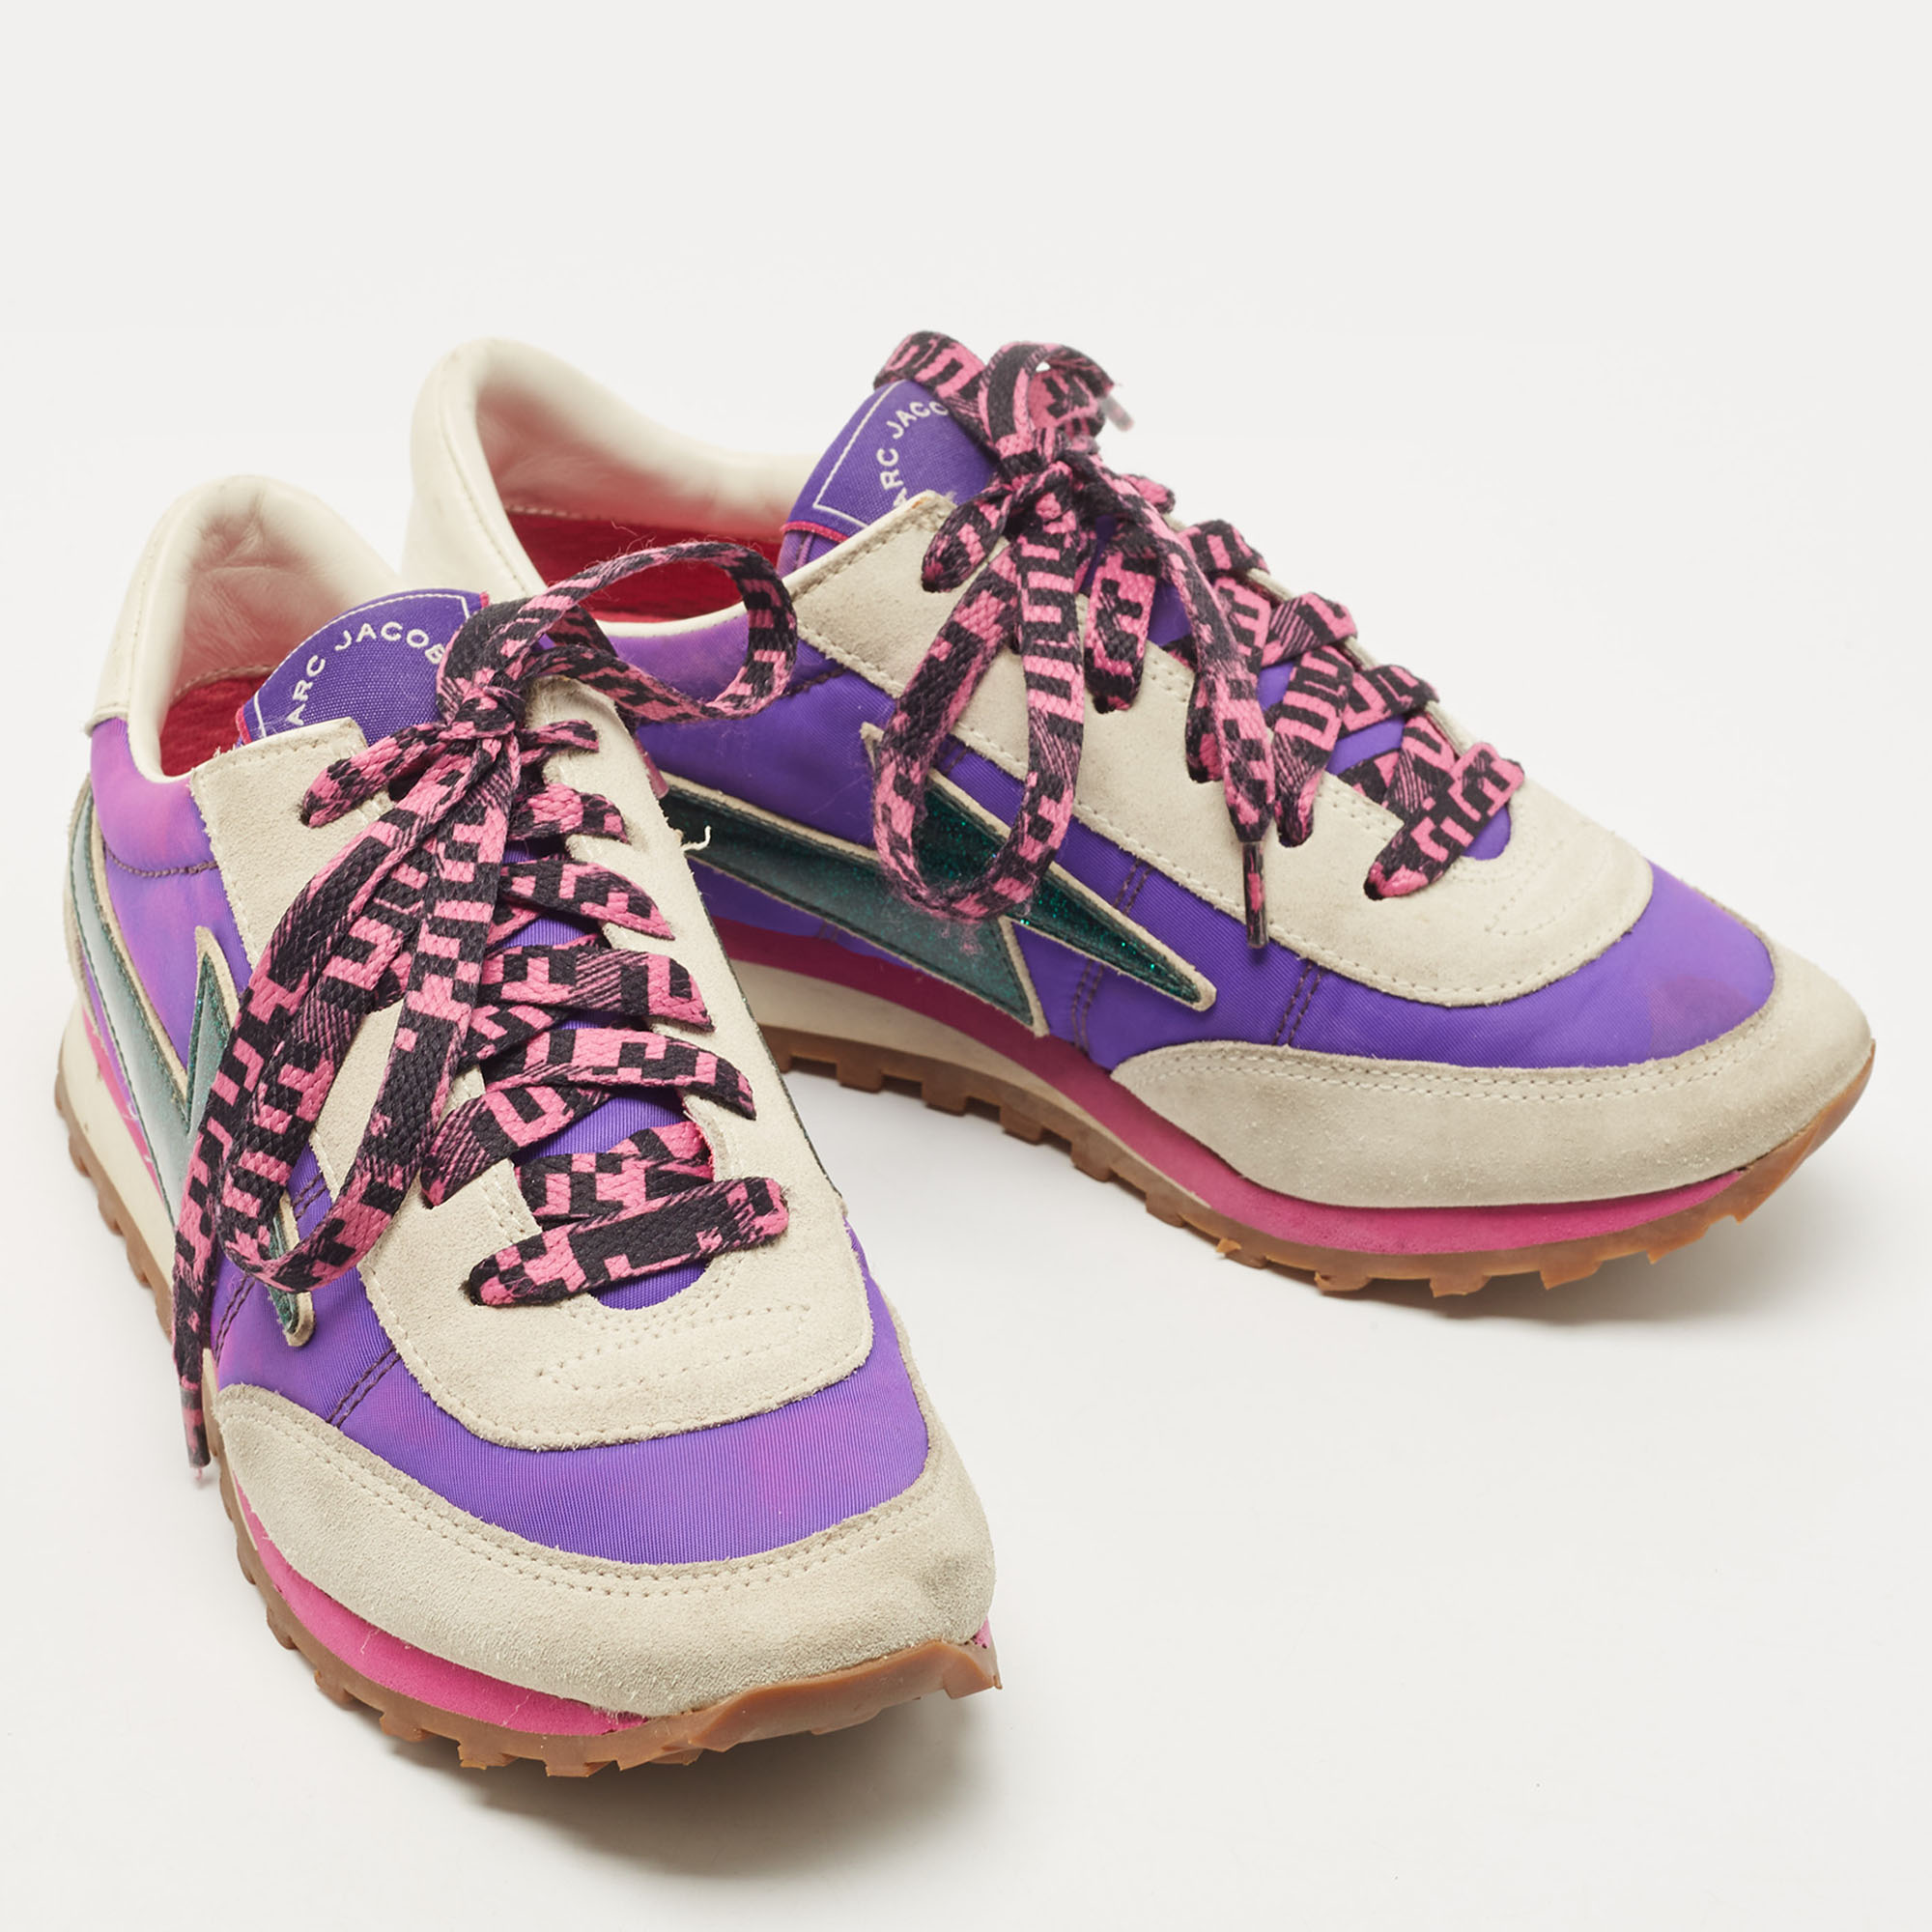 Marc Jacobs Multicolor Fabric And Suede Lightning Bolt Sneakers Size 35